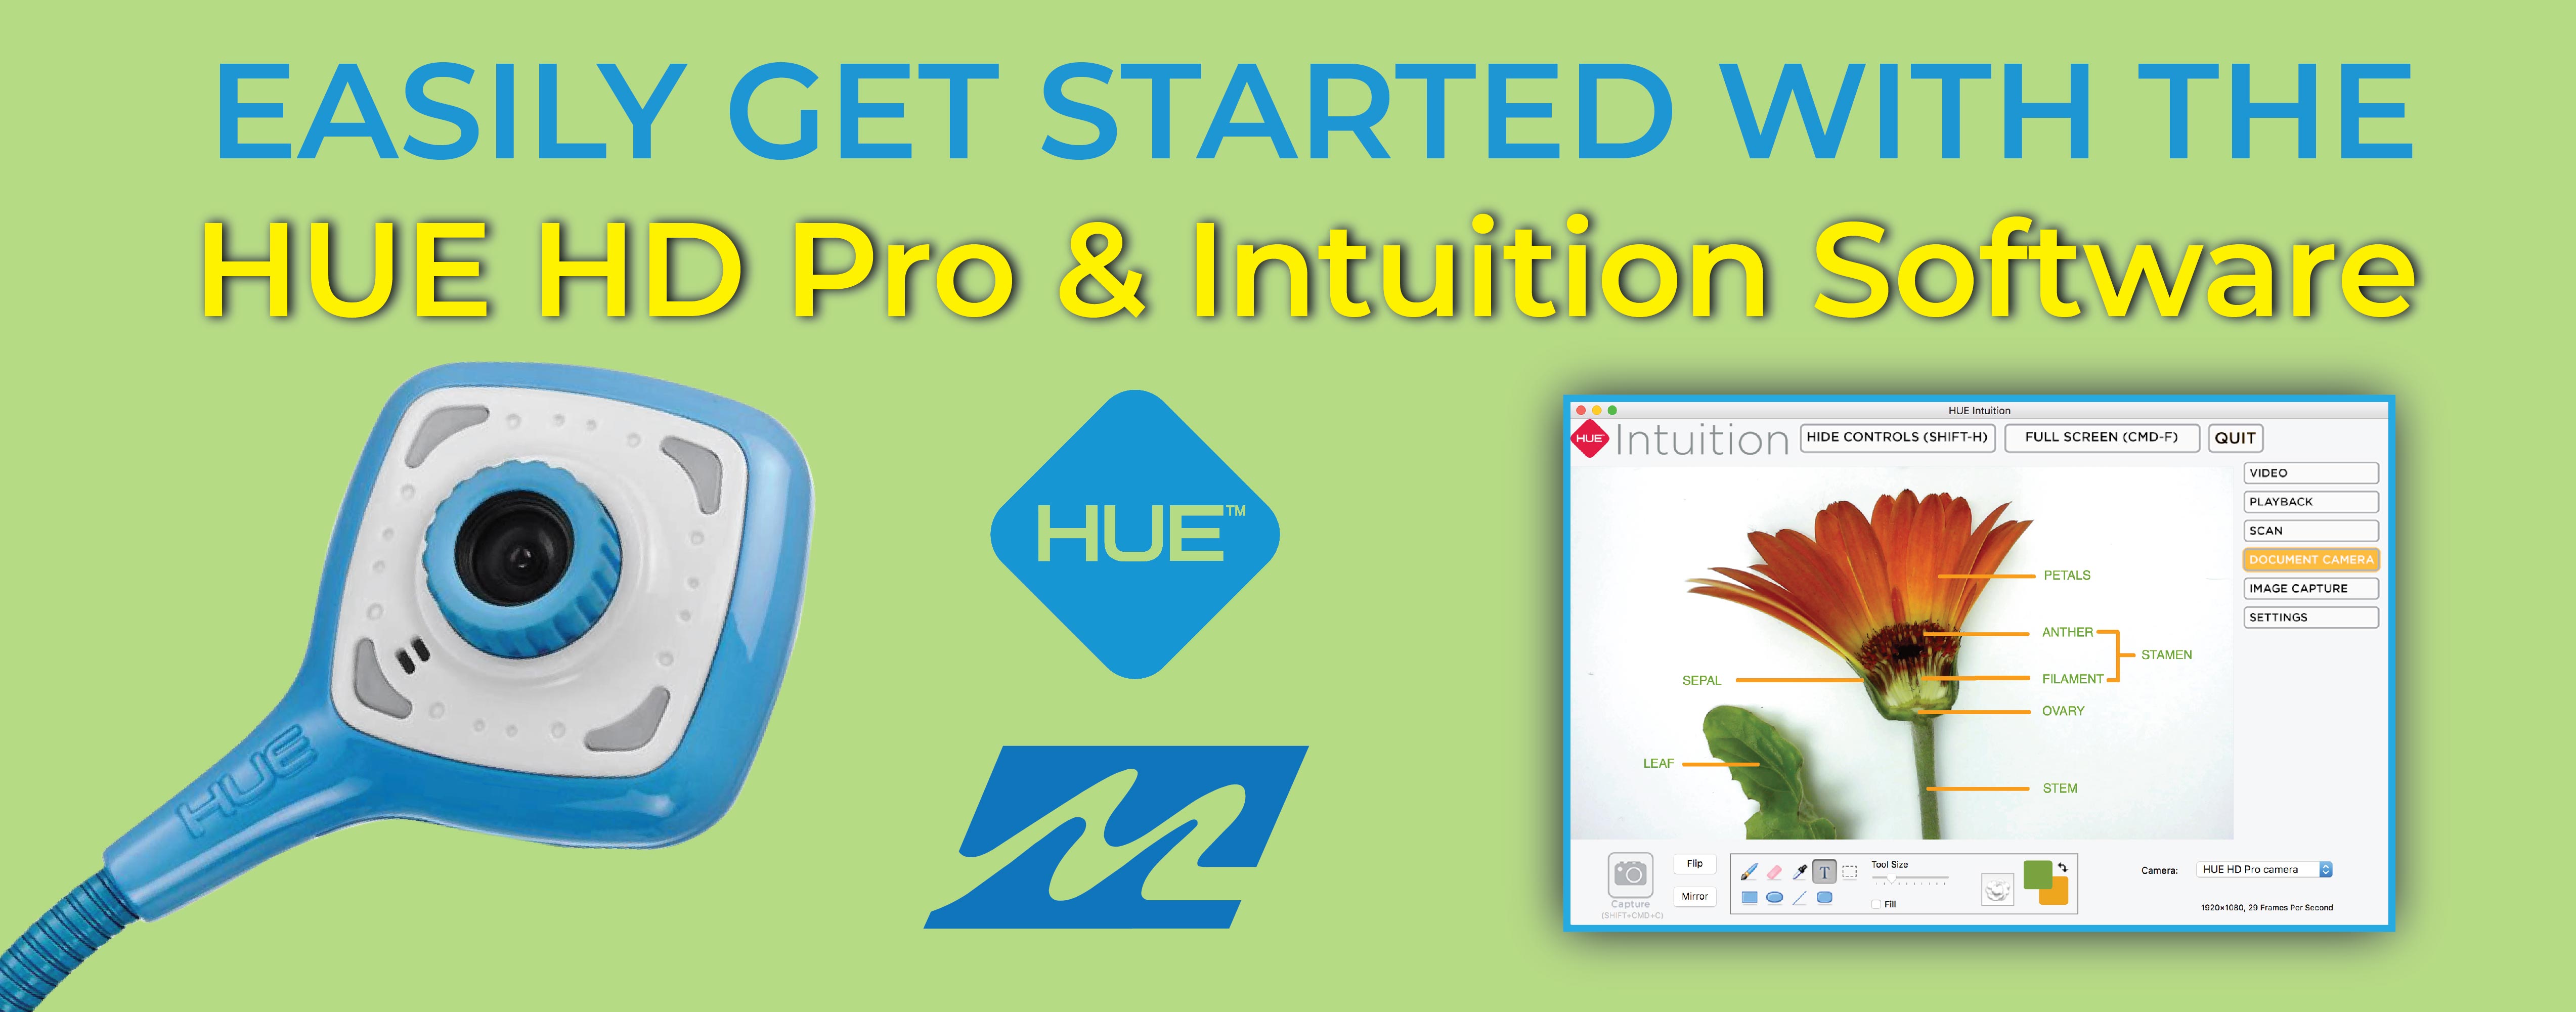 Easily Get Started with the HUE HD Pro Camera & Intuition Software -  Midwest Technology Products